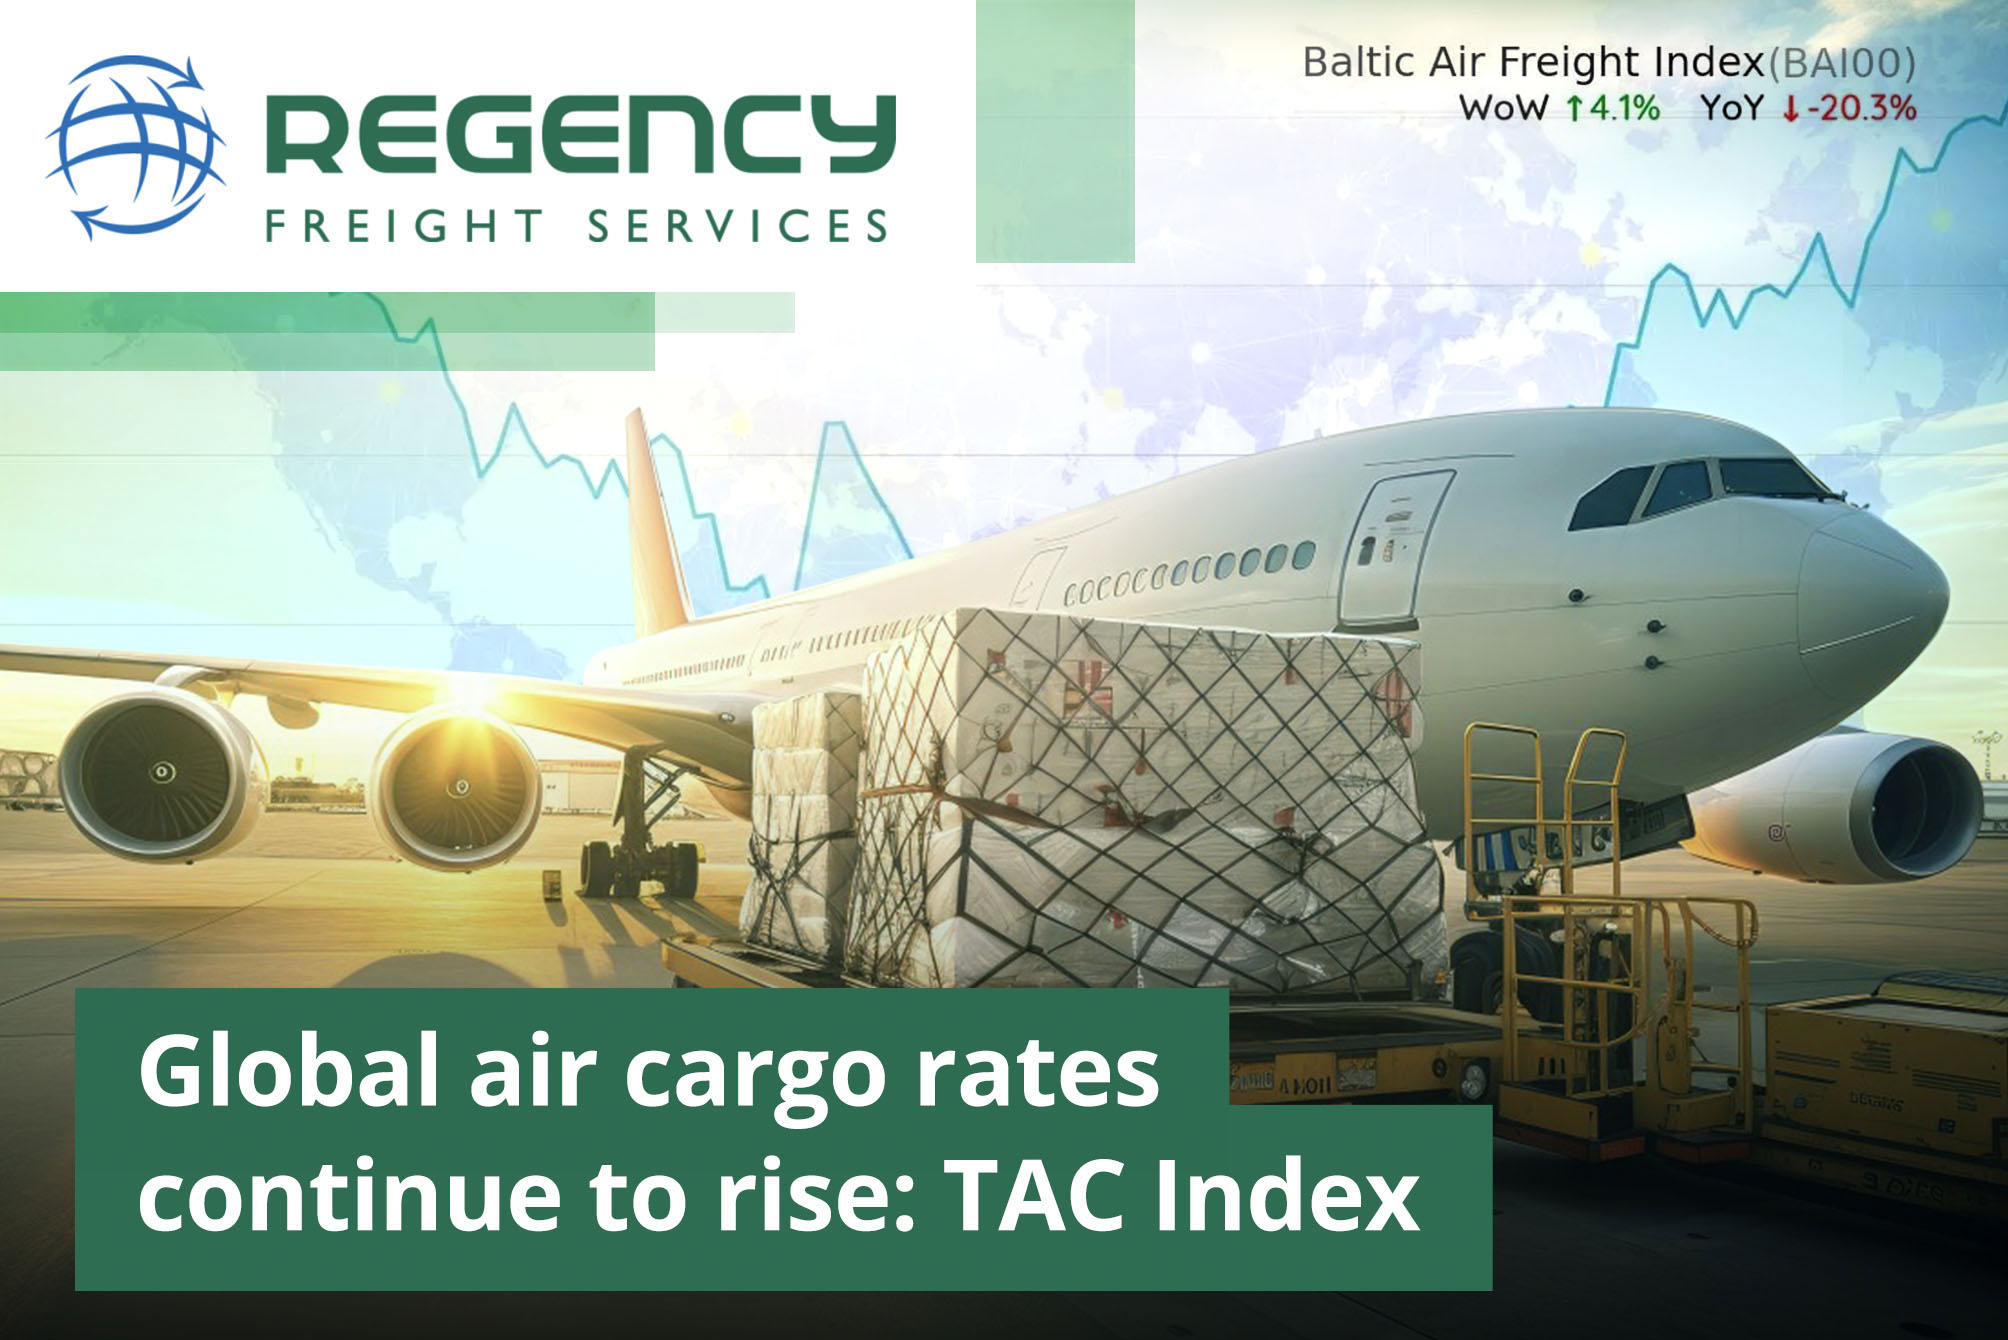 Global air cargo rates continue to rise by TAC Index